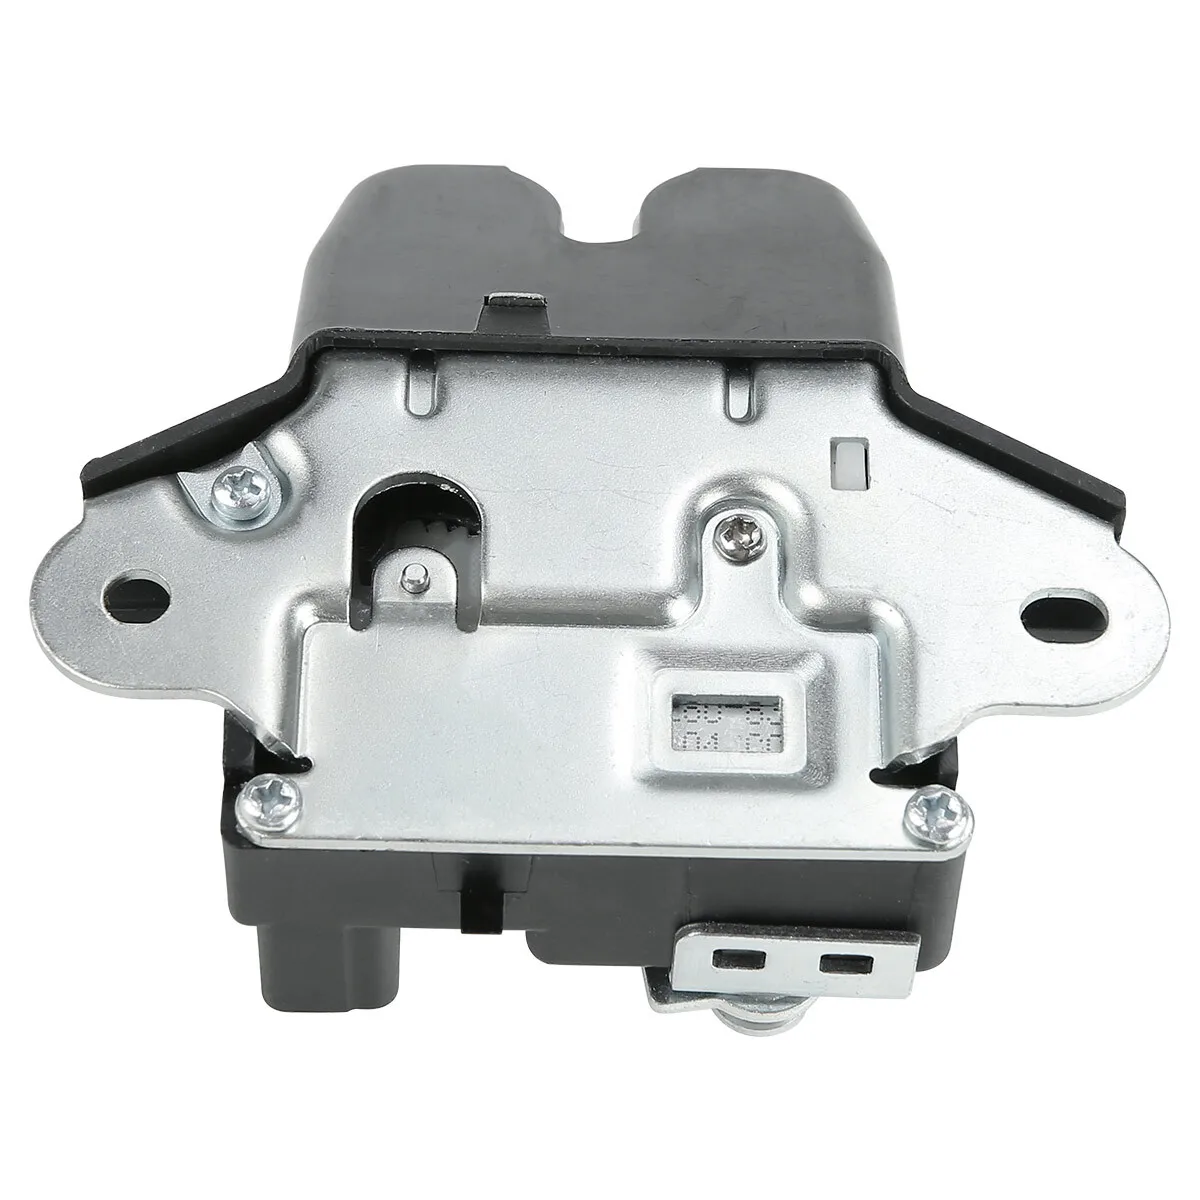 

In-stock CN US CA Rear Trunk Lid Latch Lock Actuator for Hyundai Genesis Coupe 10-16 Sonata 08-10 812300A501